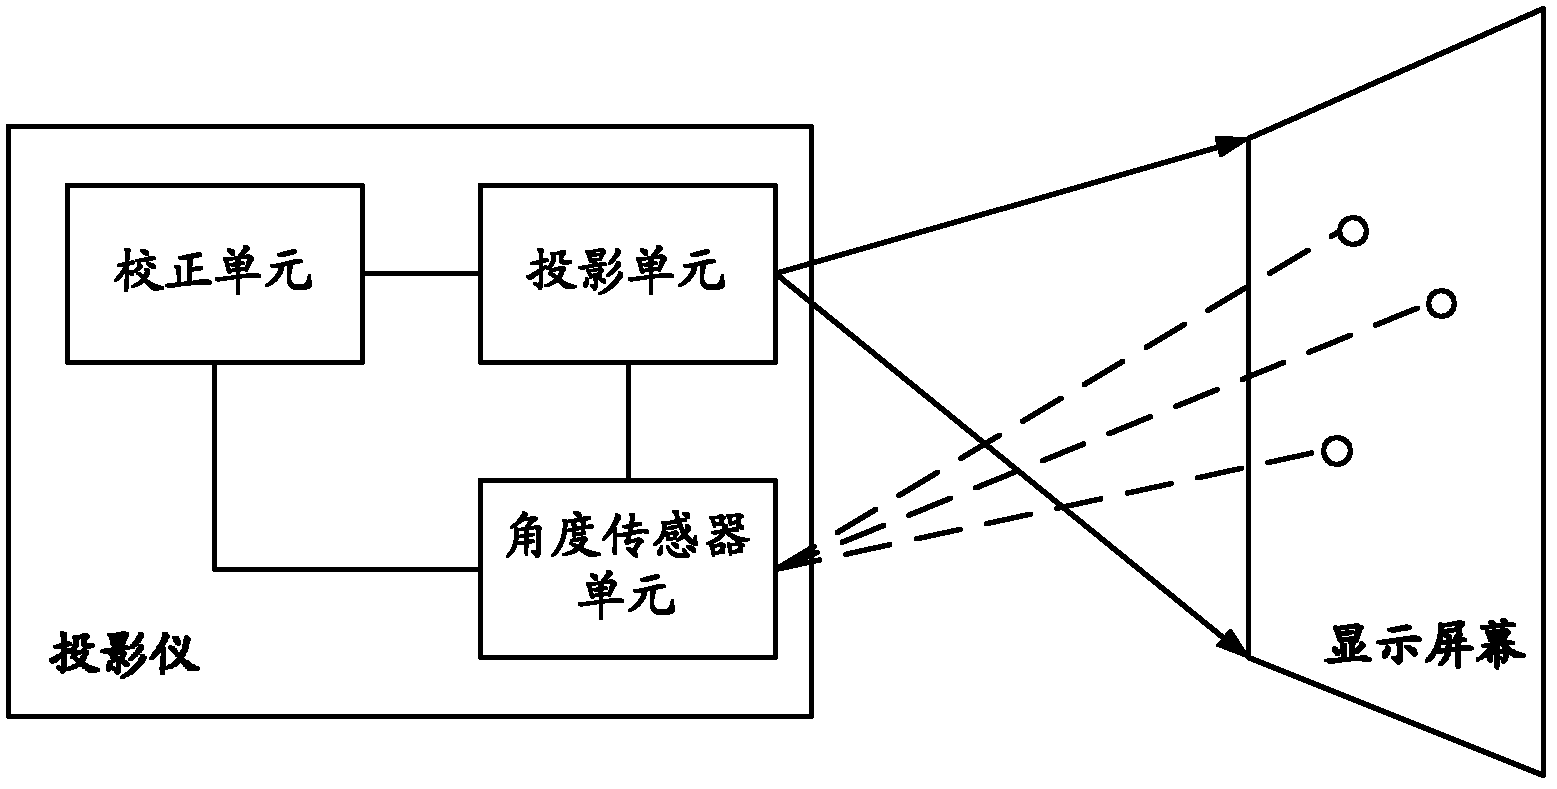 Projector and projection image rectifying method thereof